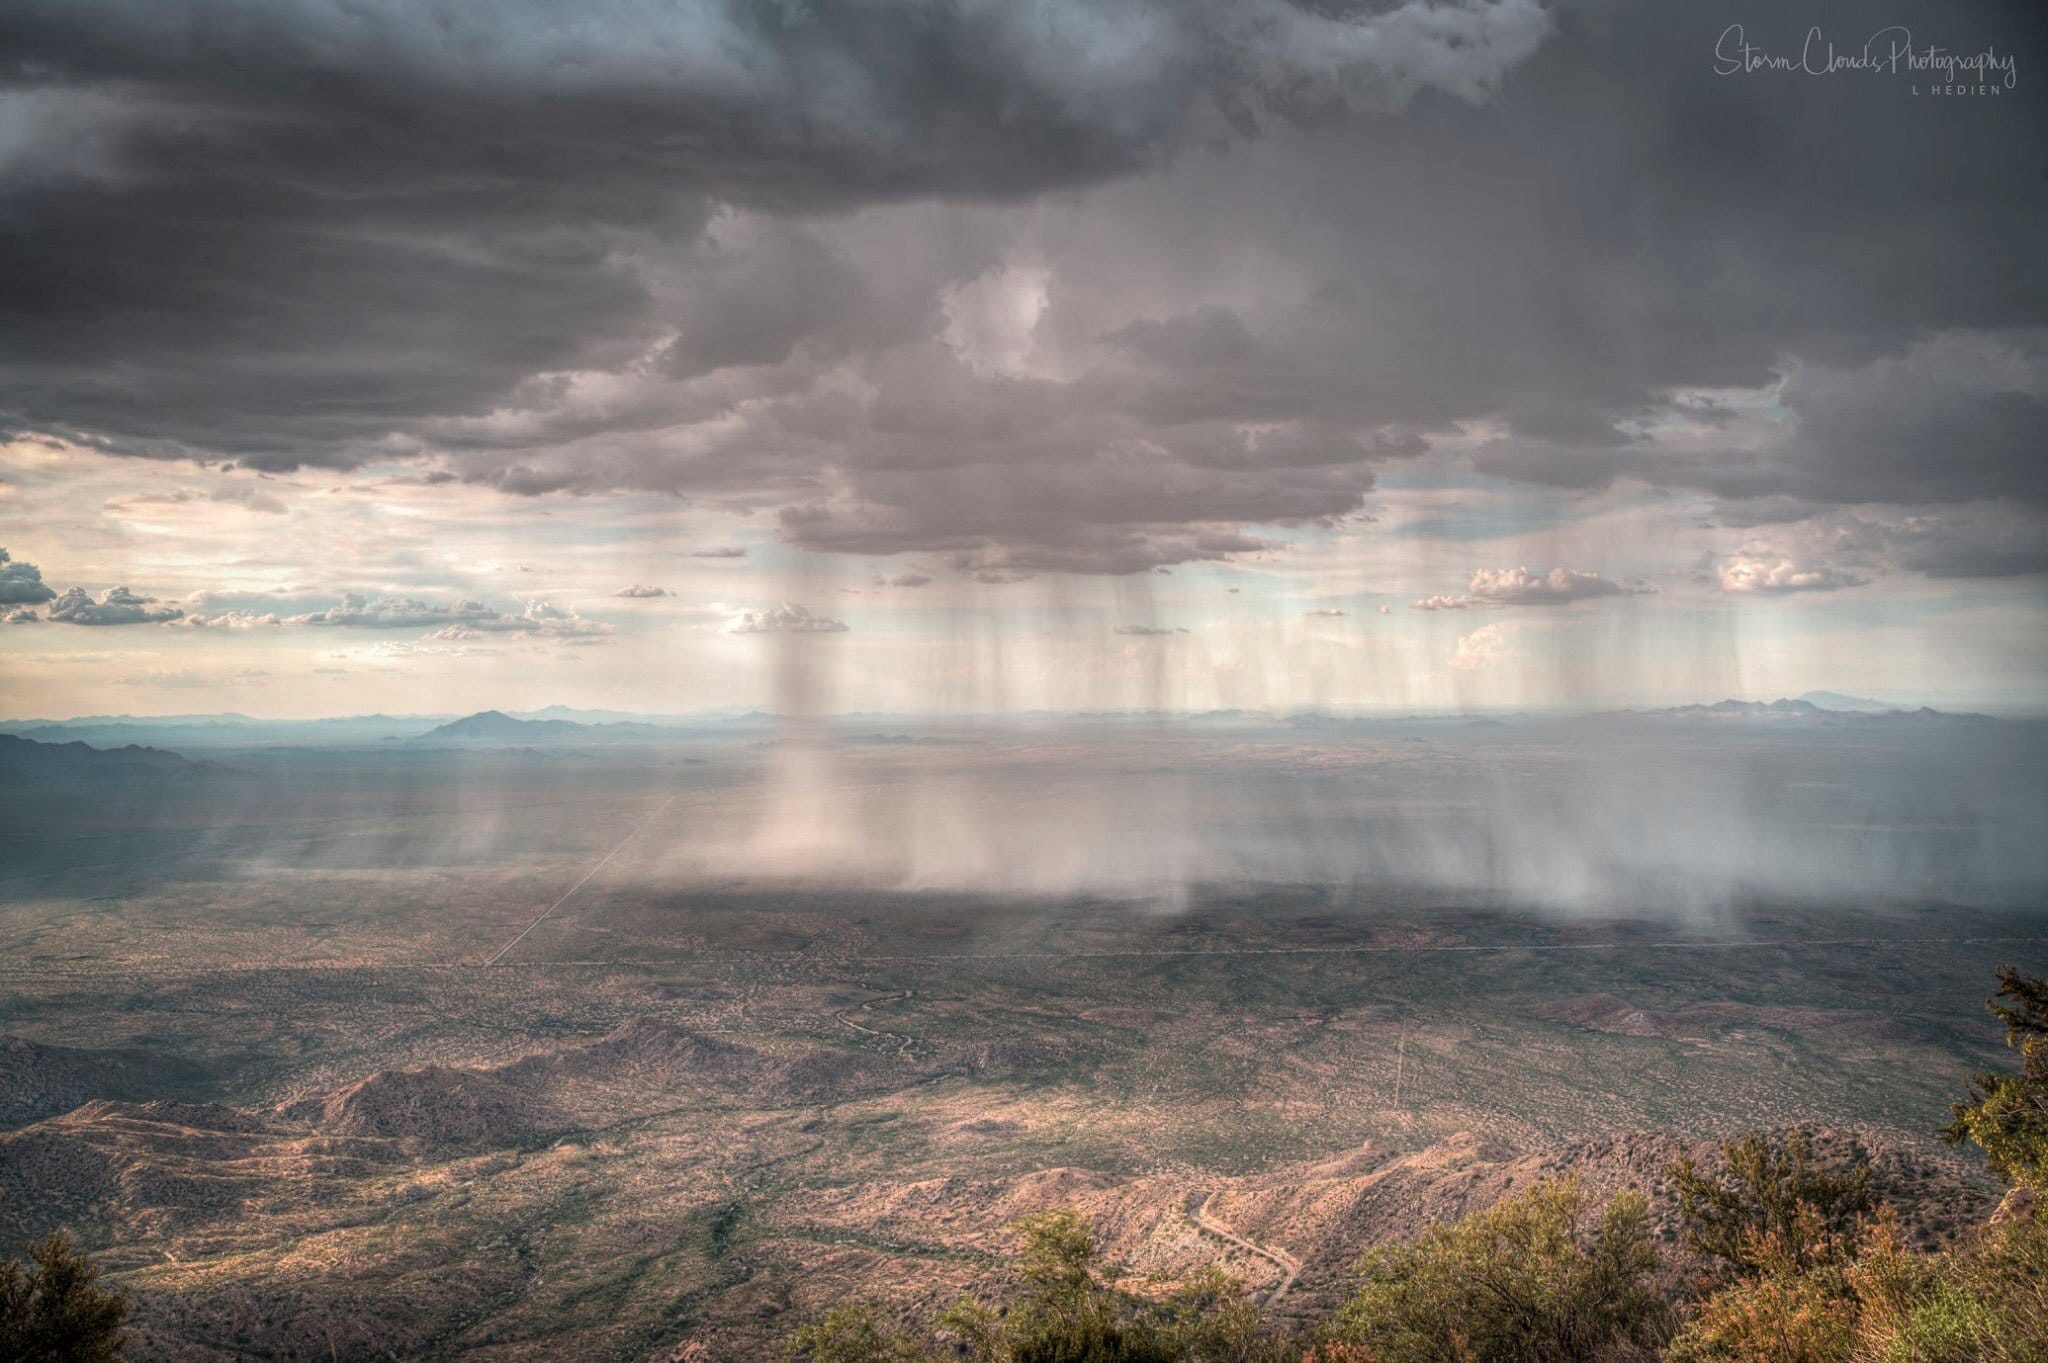 2nd Place A bird’s eye view of a Tucson monsoon by Laura Hedien- Storm Clouds Photography @lhedien